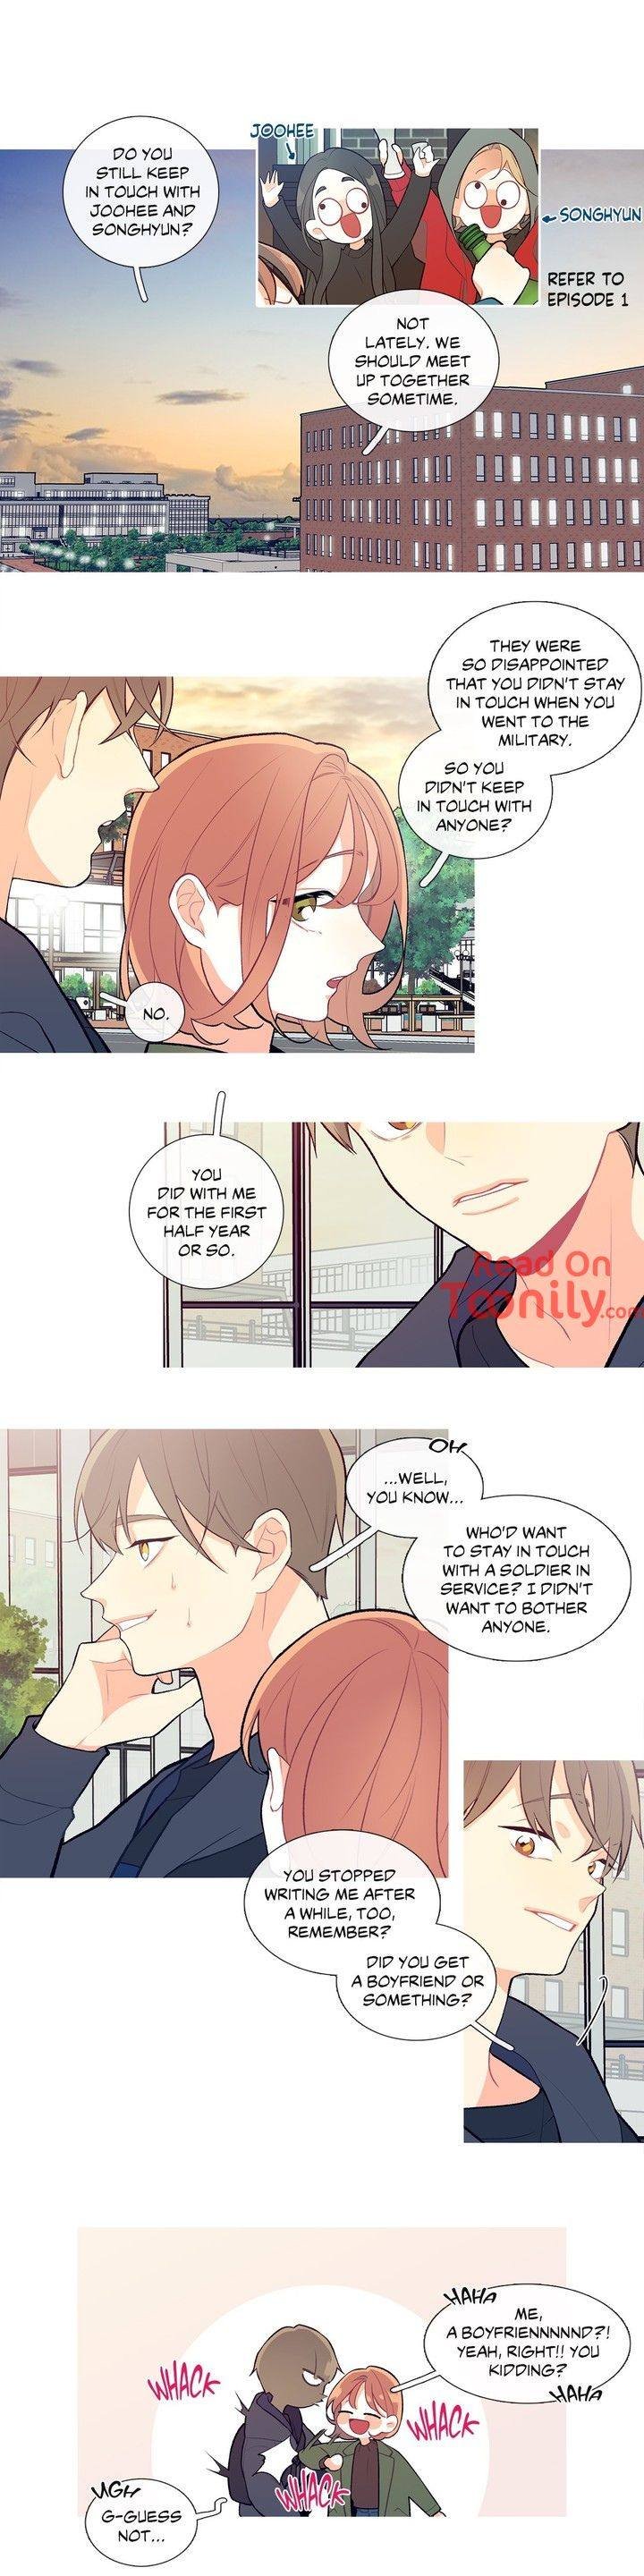 whats-going-on-chap-8-0